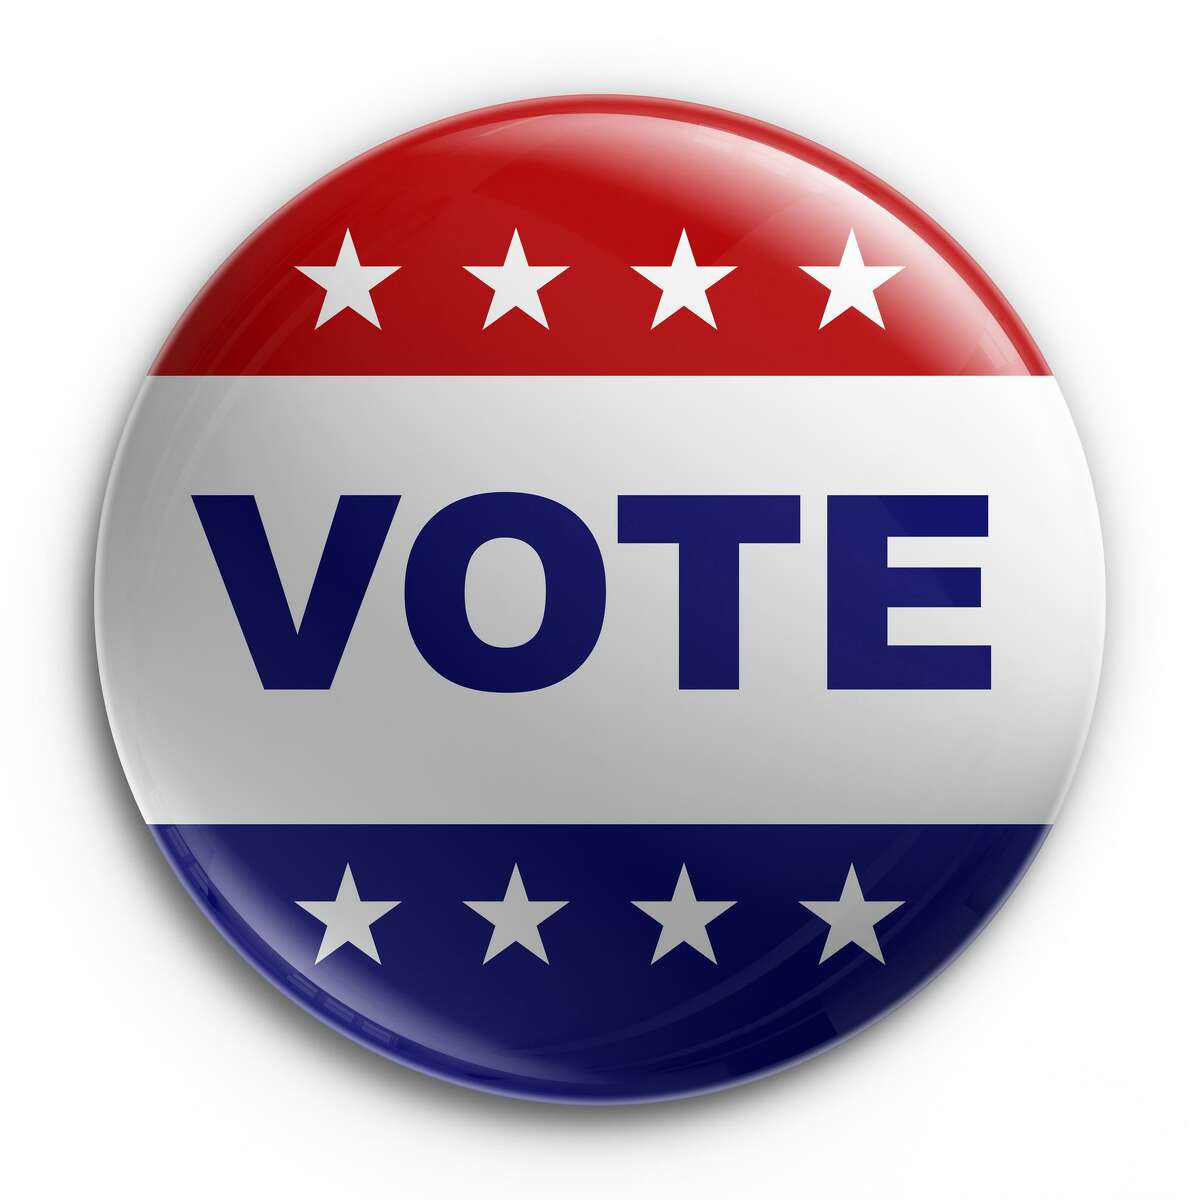 Early voting in the runoff election for a spot on the Missouri City City Council is currently underway.